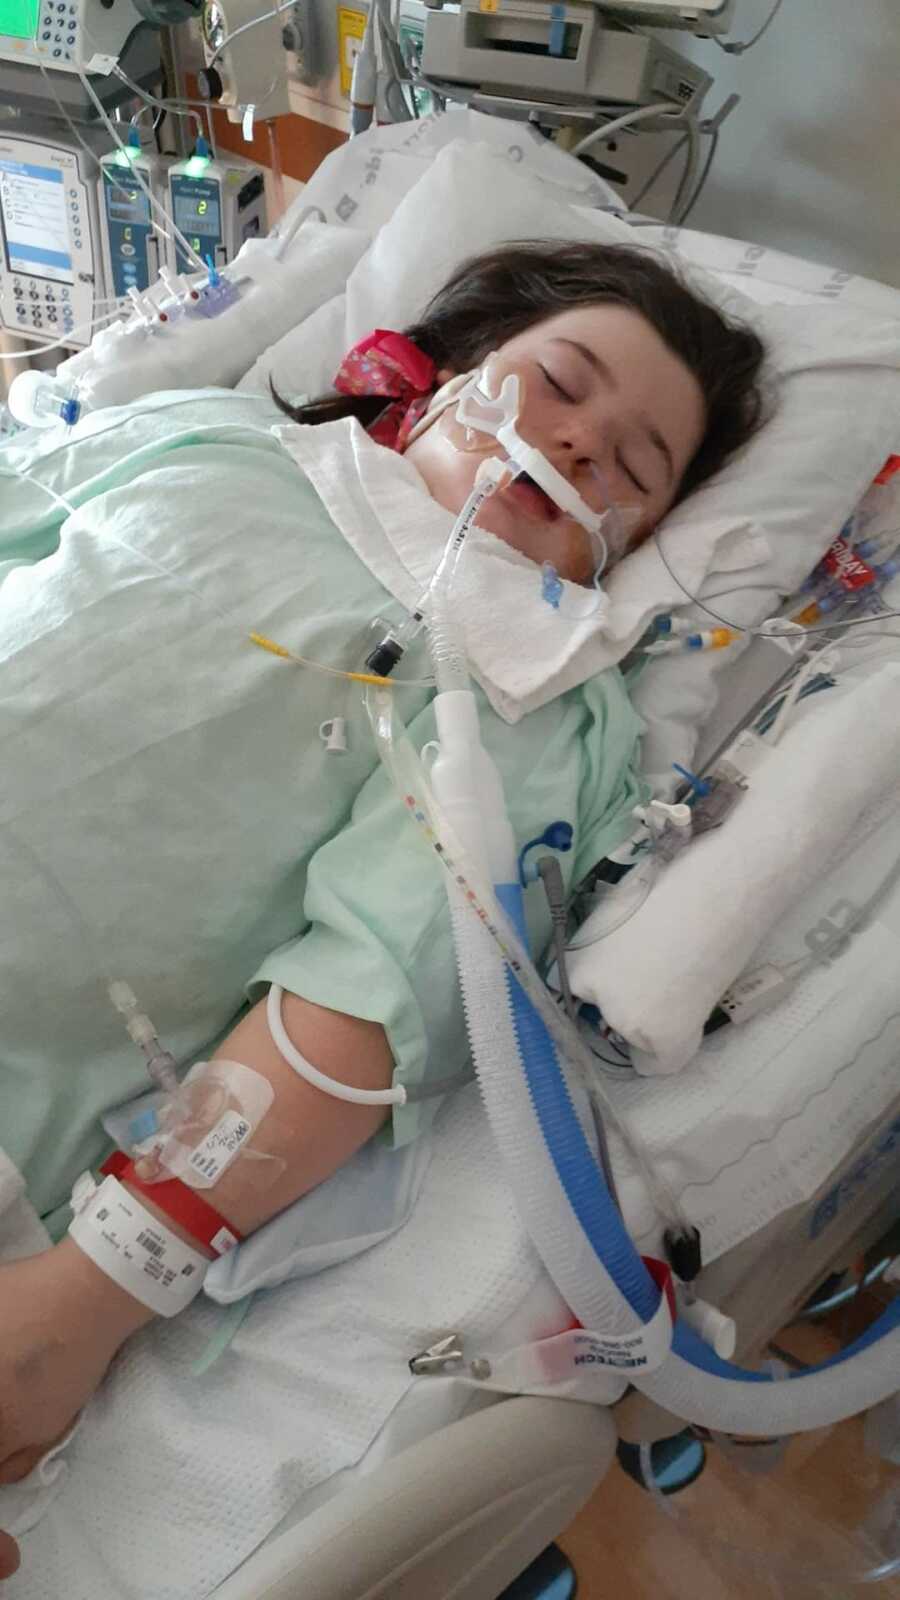 Girl in hospital hooked up to multiple tubes